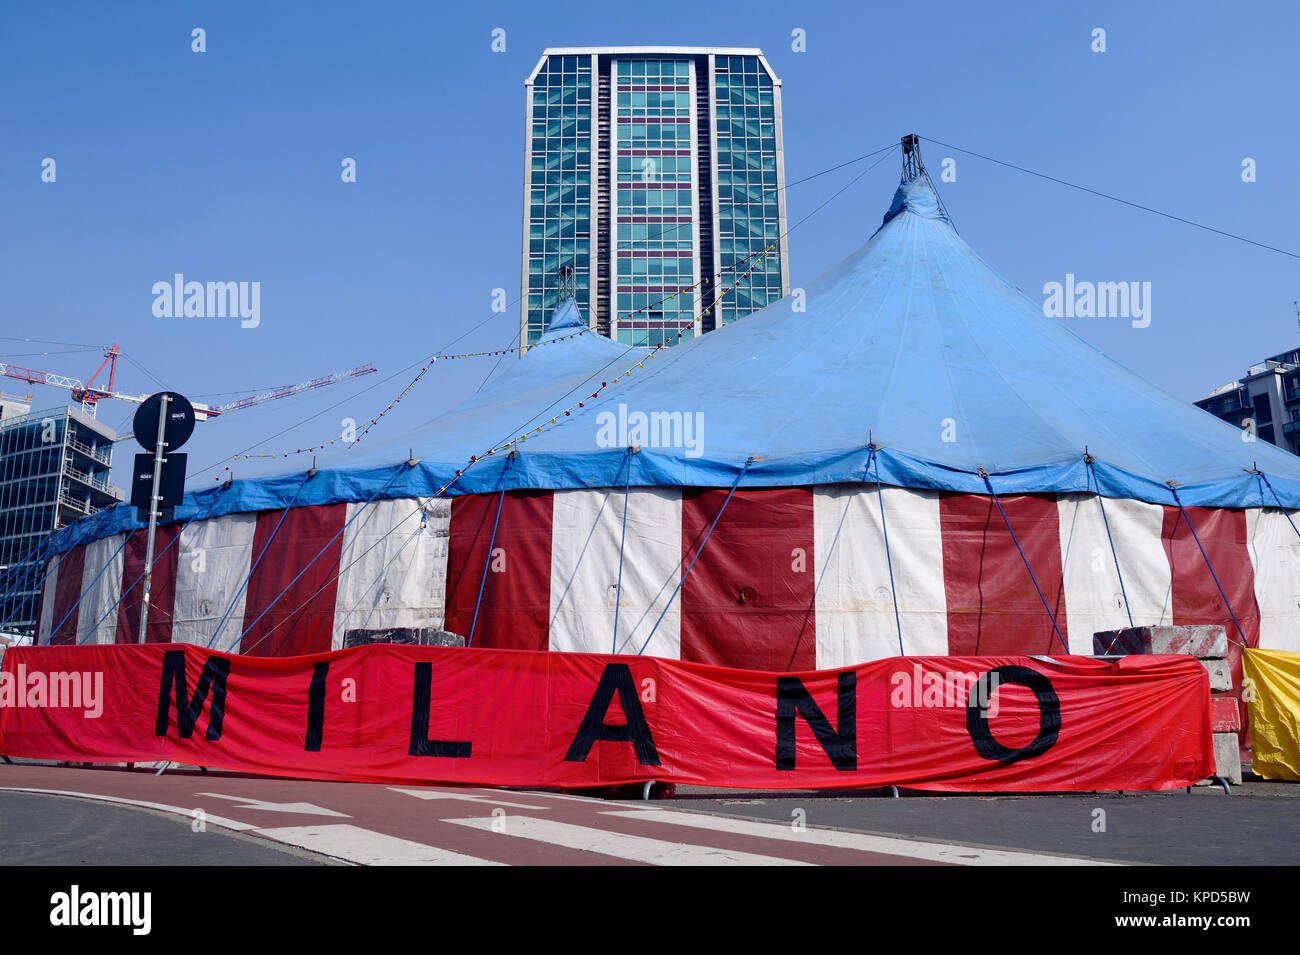 Circus tents in Milan, Italy Stock Photo